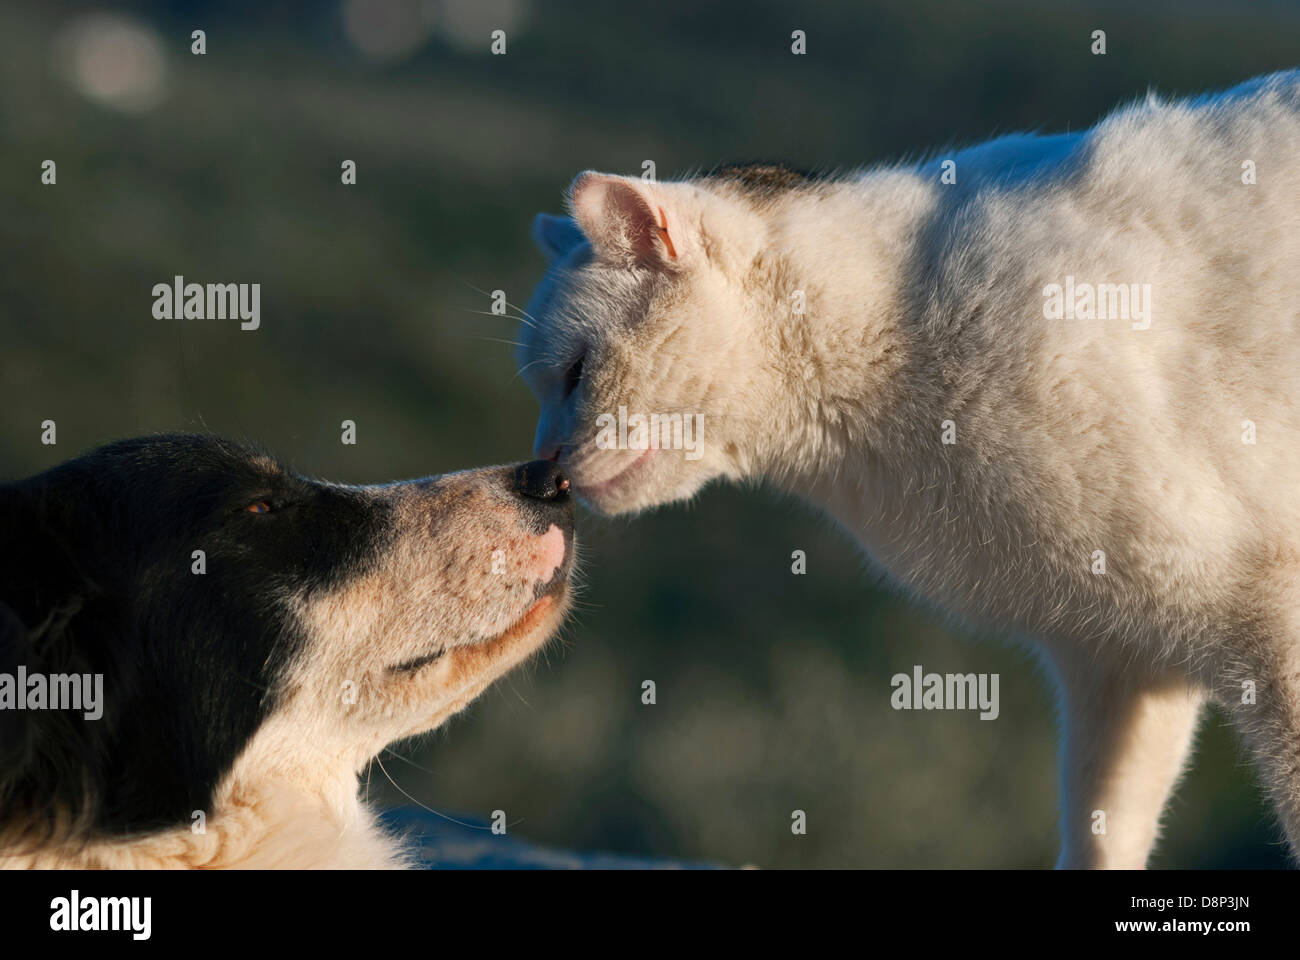 Cat and dog face to face Stock Photo